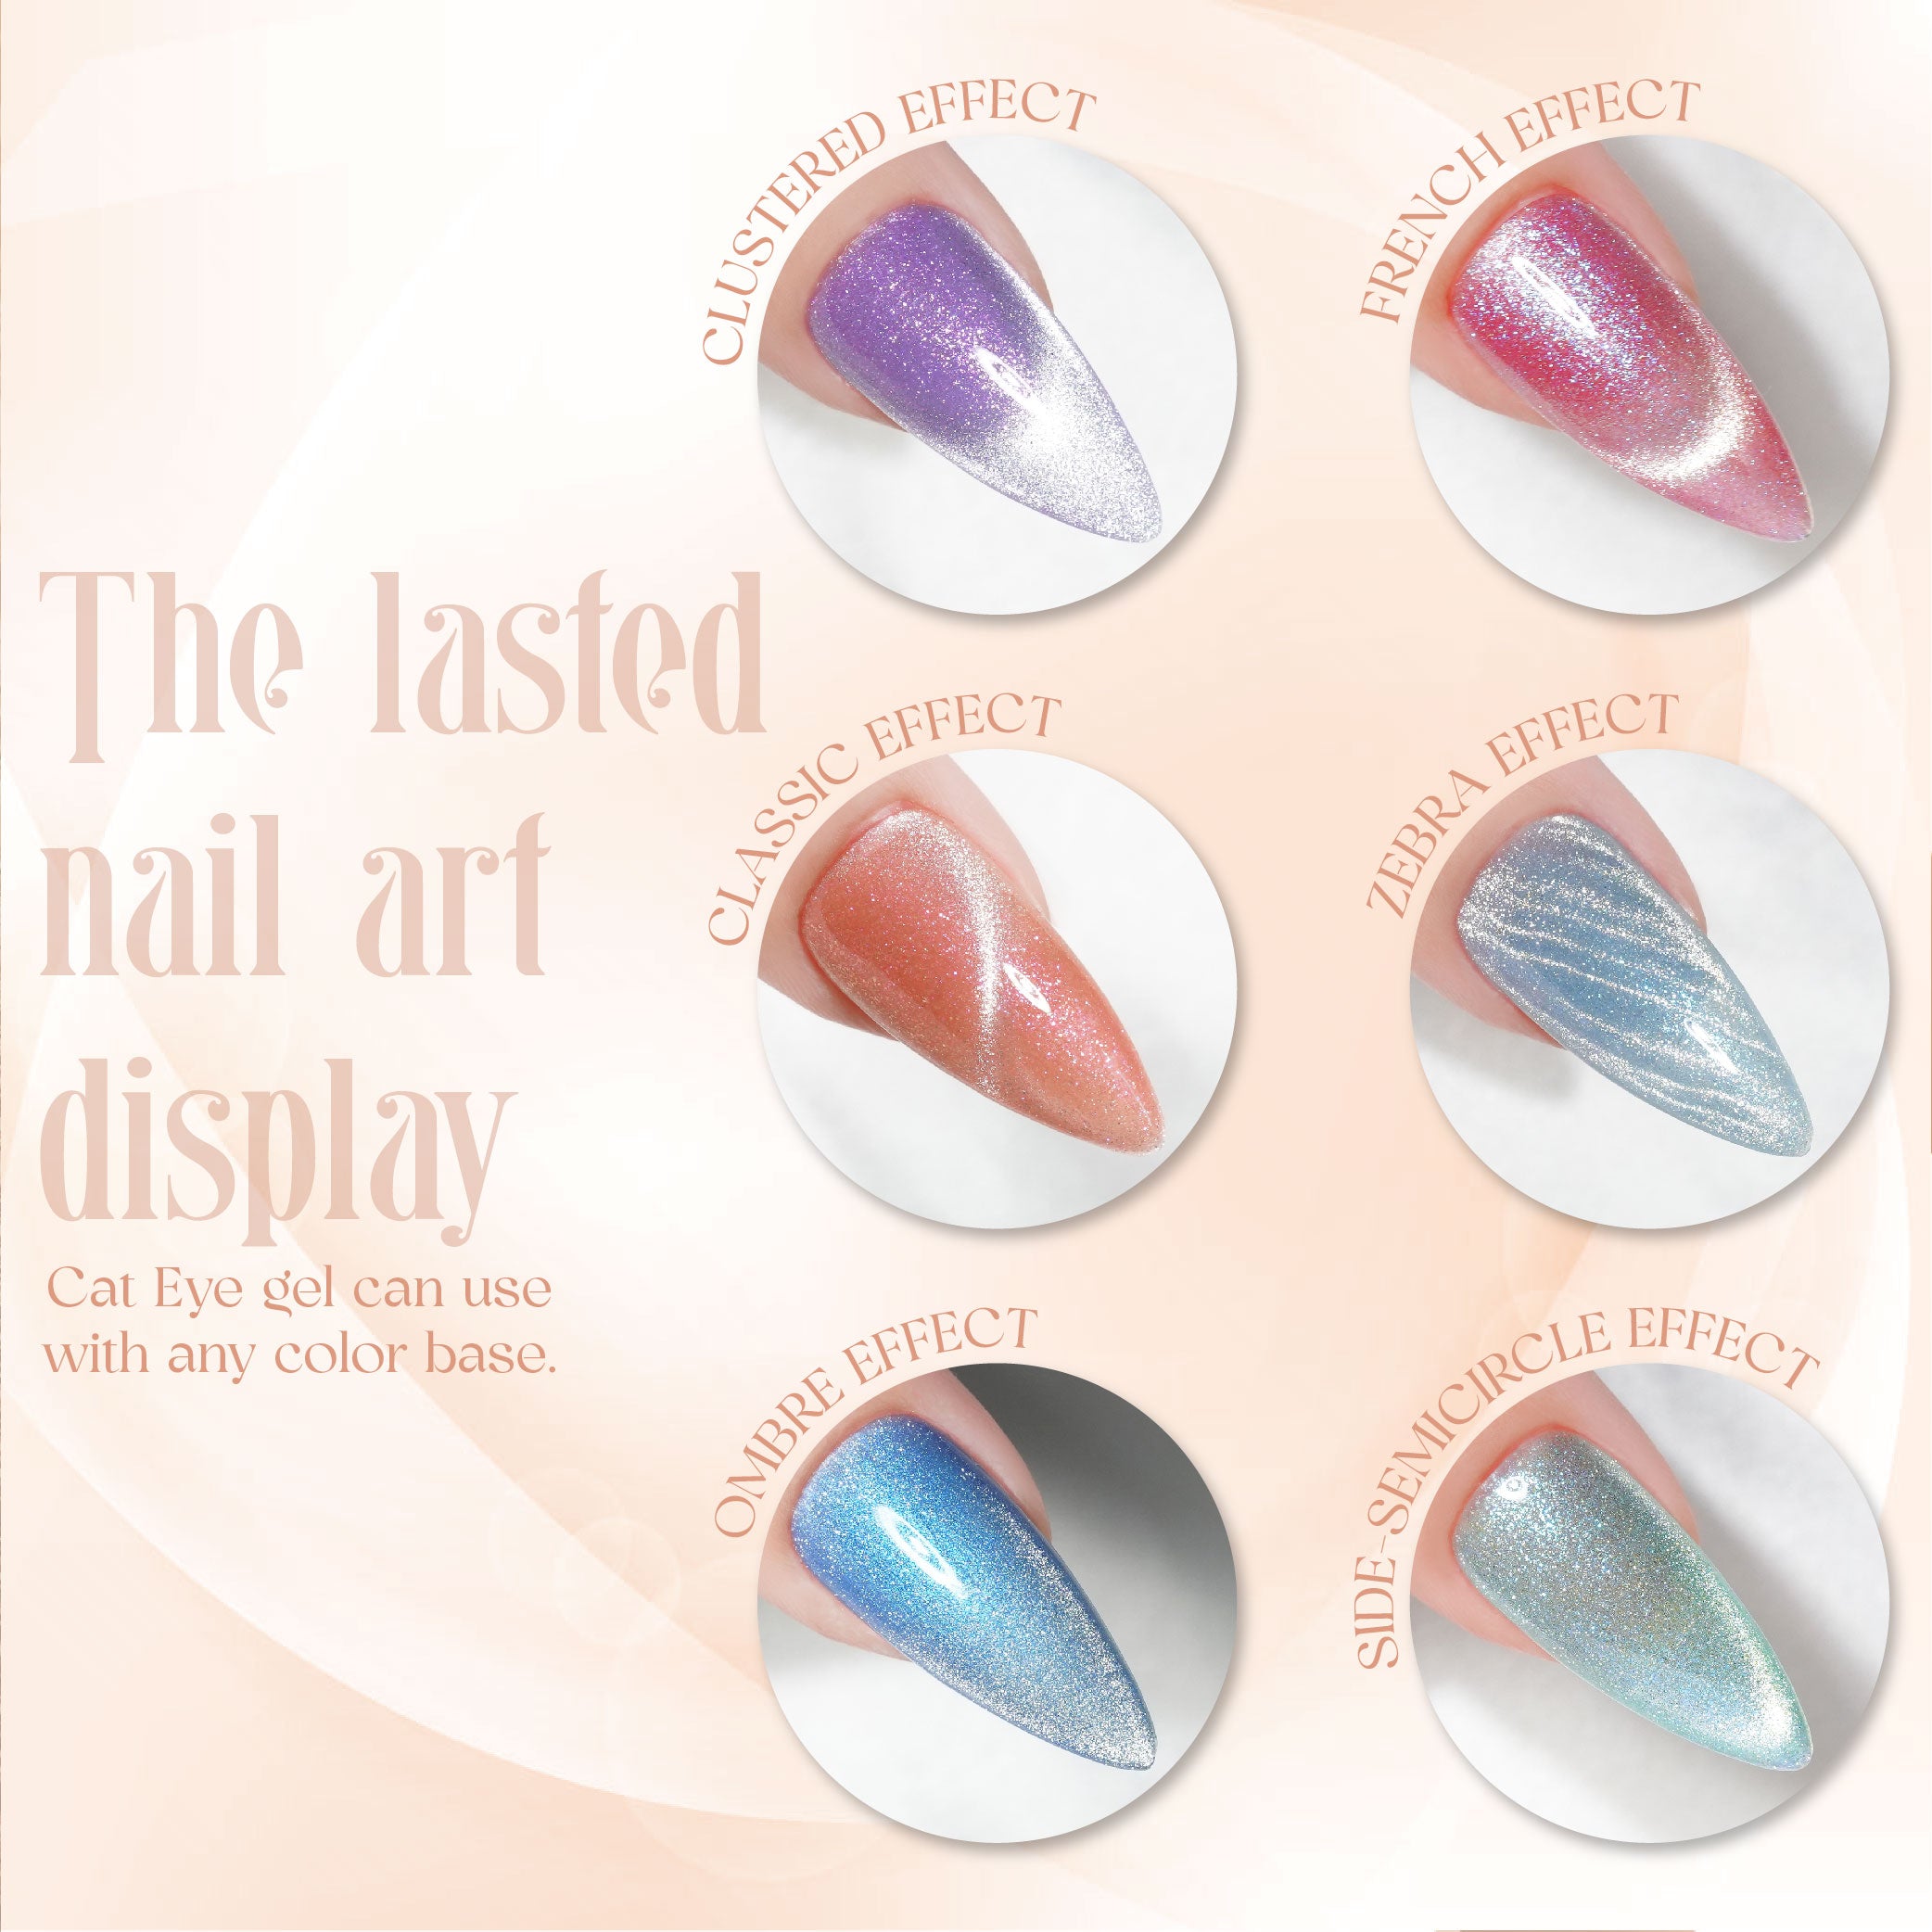 LAVIS Cat Eyes CE11 - 02 - Gel Polish 0.5 oz - Enchanted Spell Collection